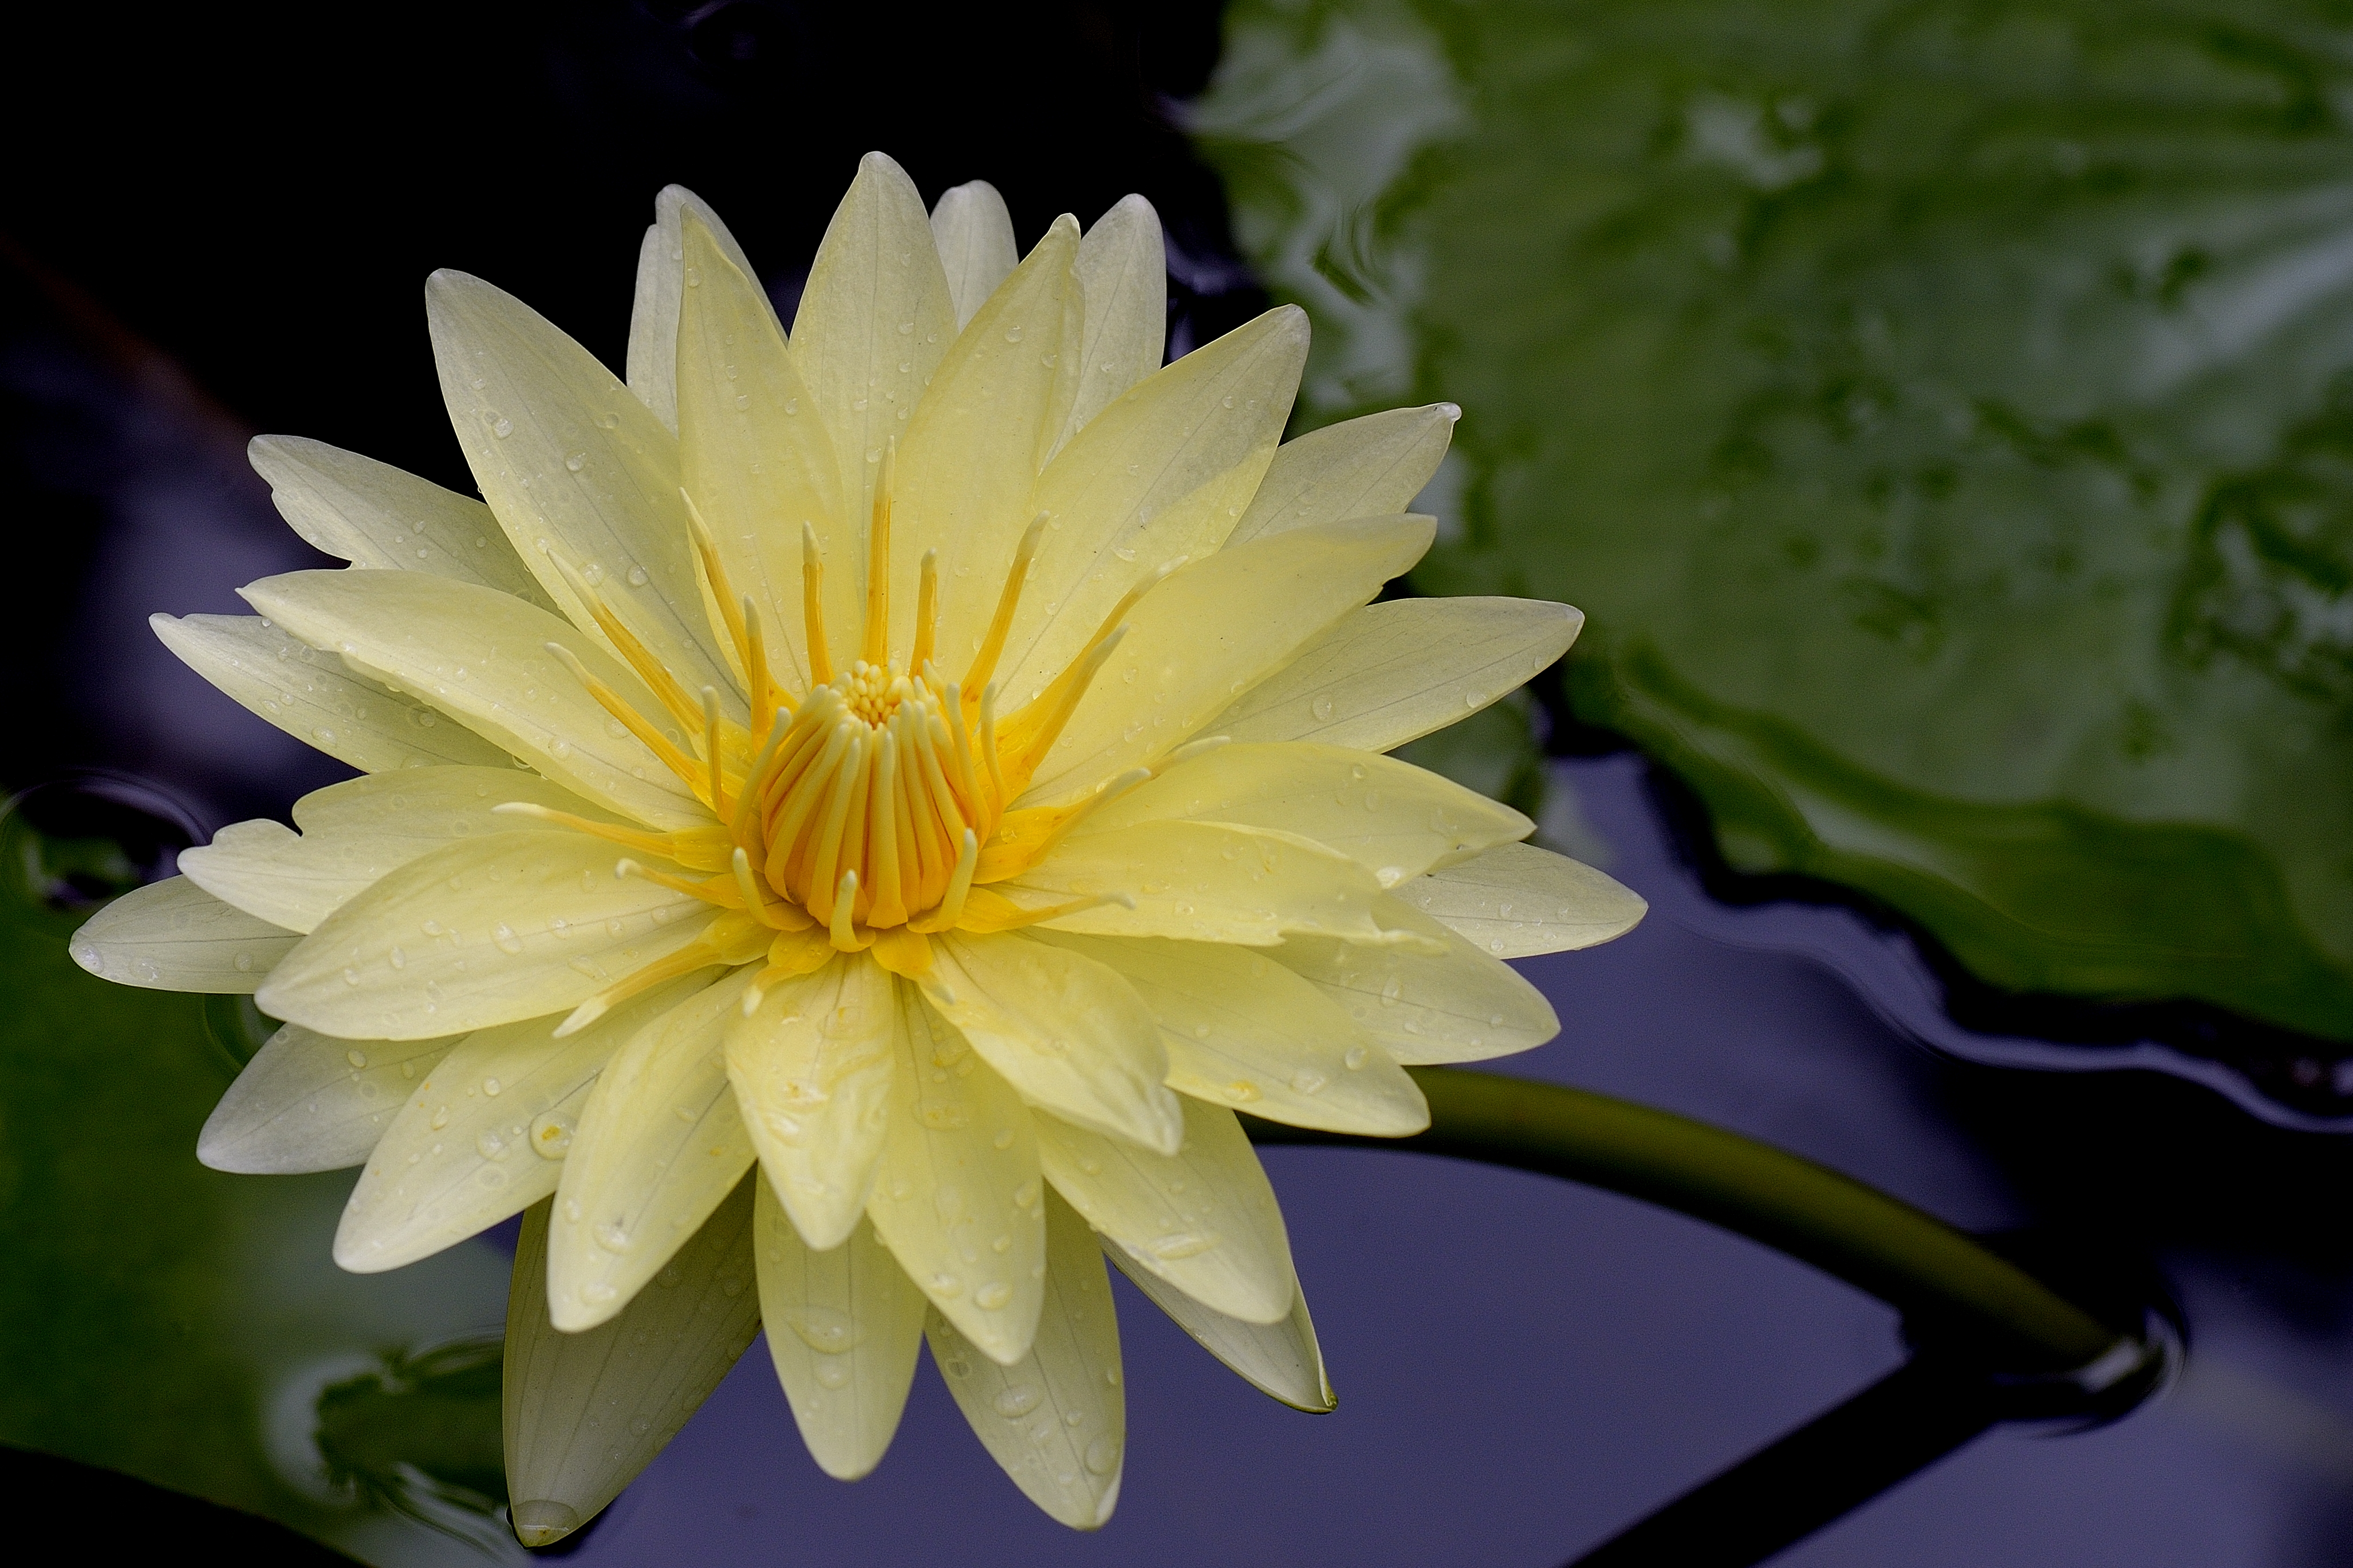 lotus, earth, lily pad, yellow flower, flowers